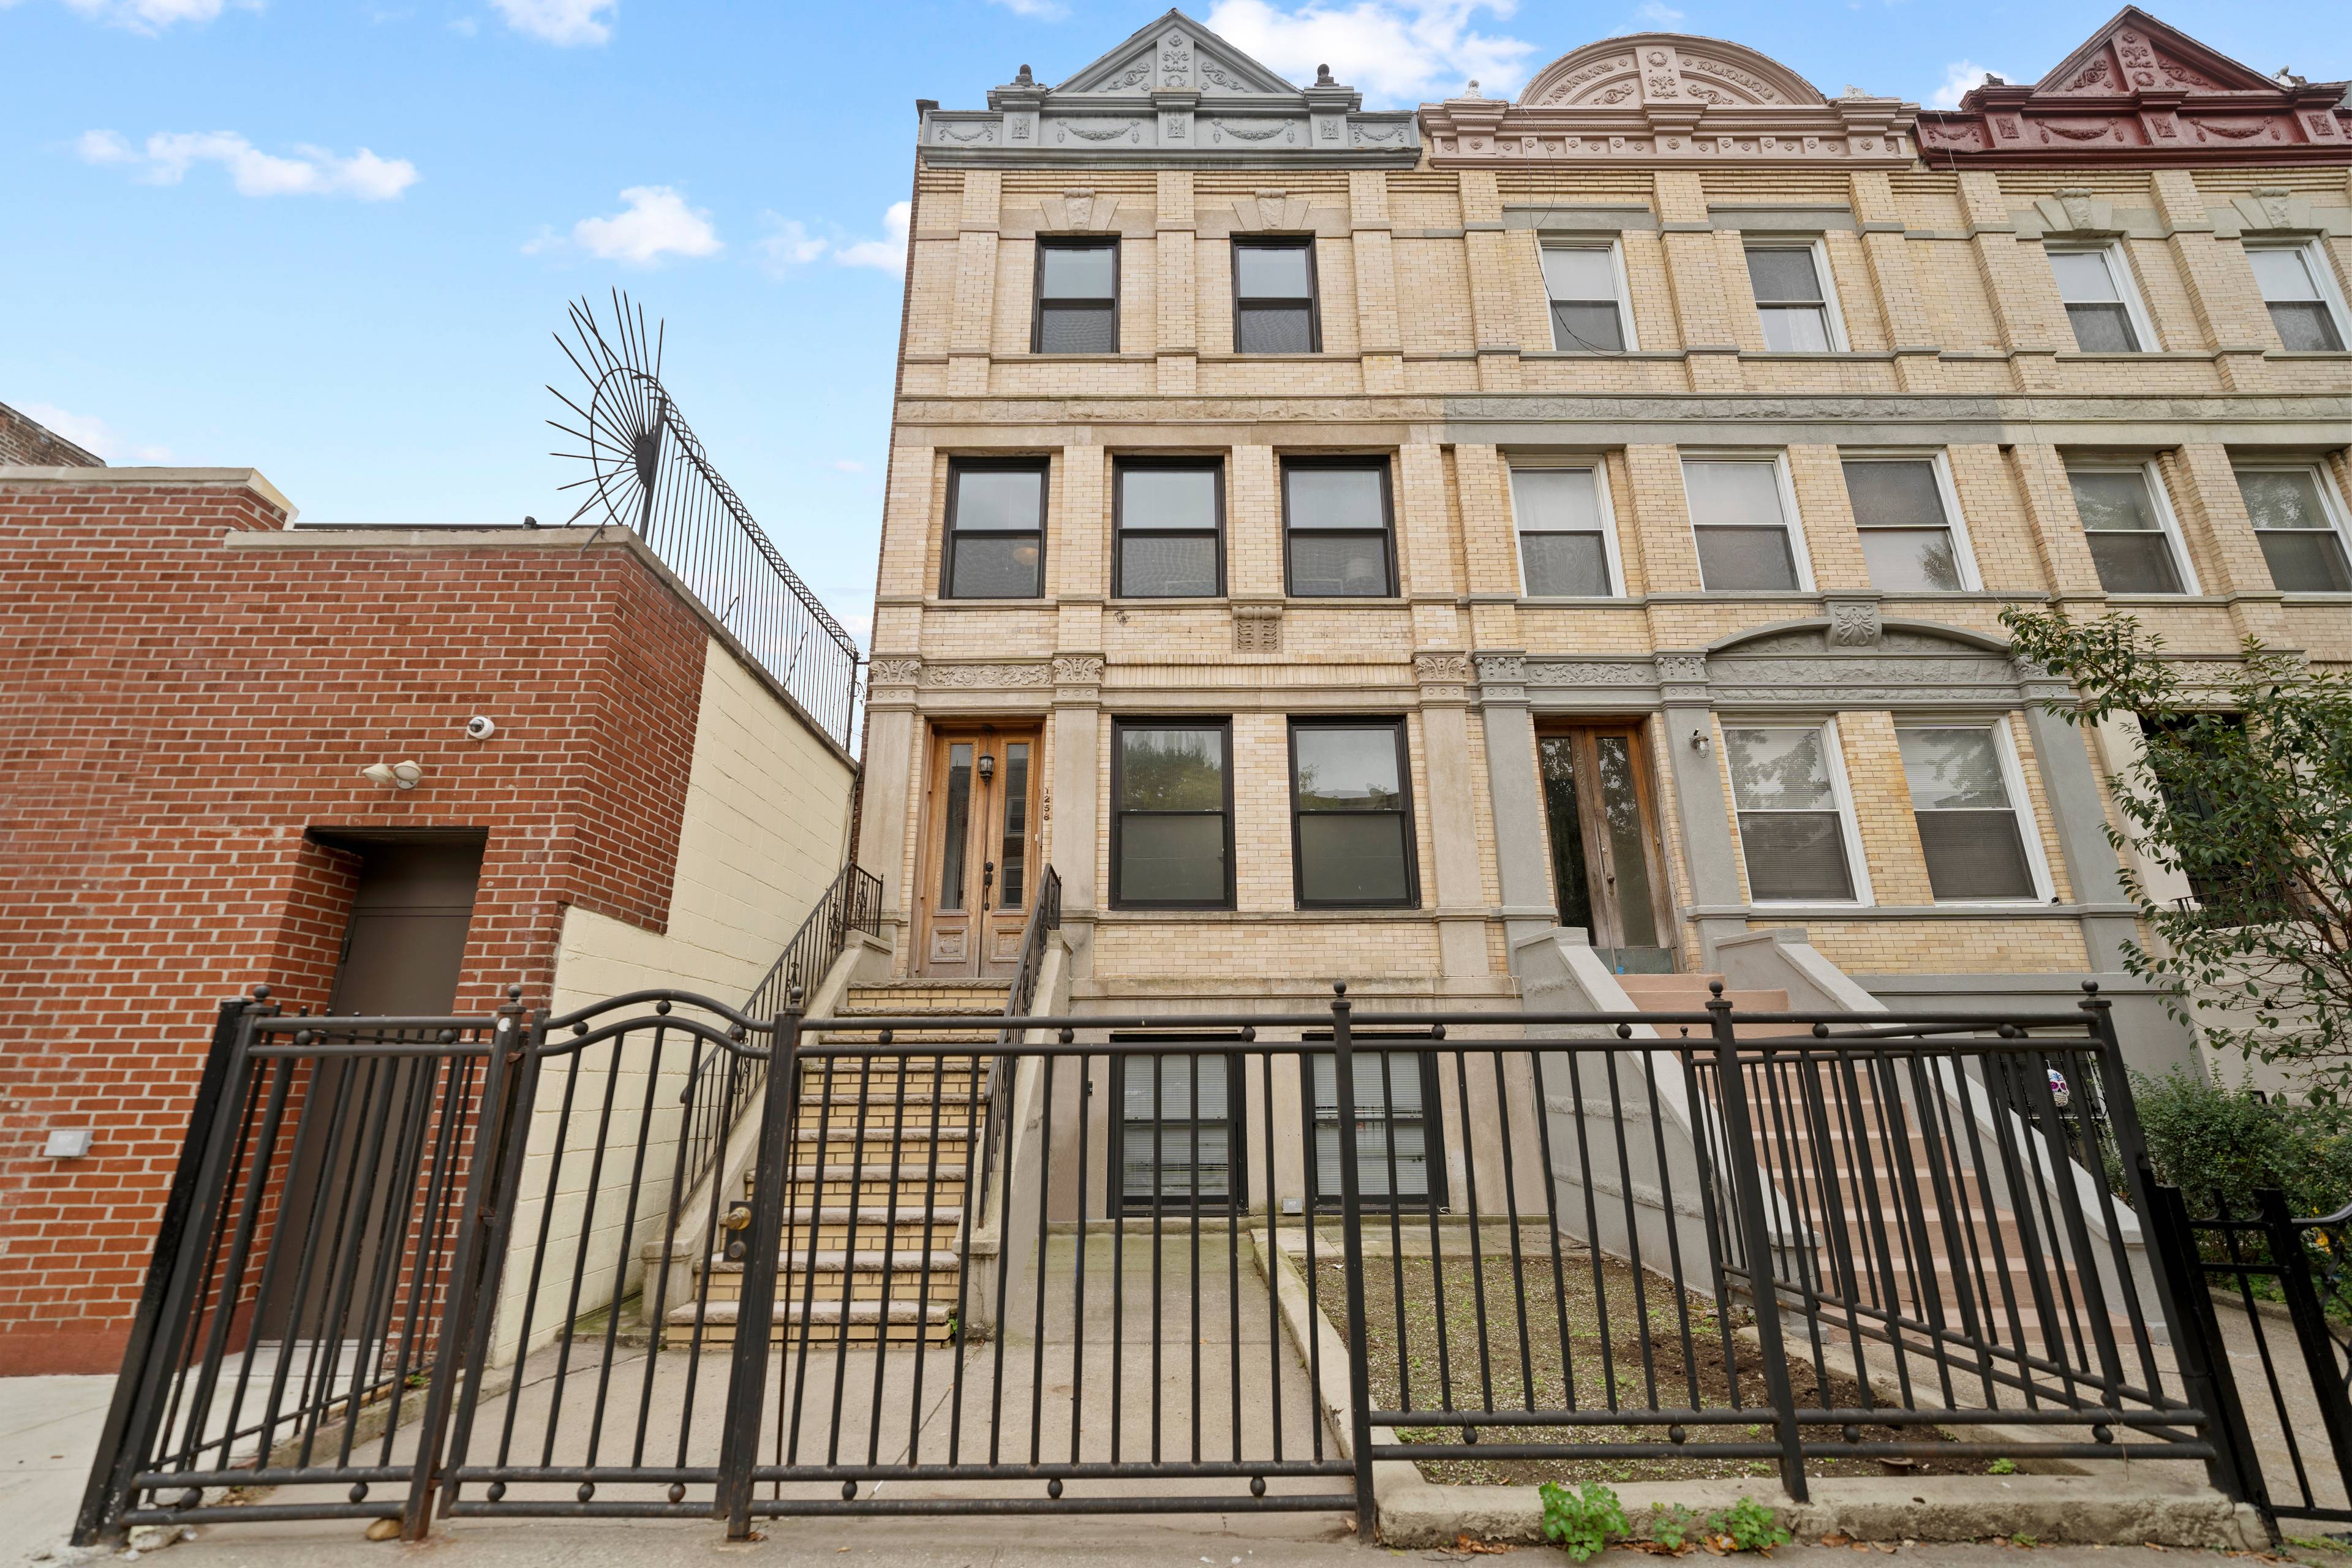 Gorgeous, impeccably GUT renovated 1898 classic RESTORED Brick townhouse on one of the most coveted blocks in crown heights near all conveniences !